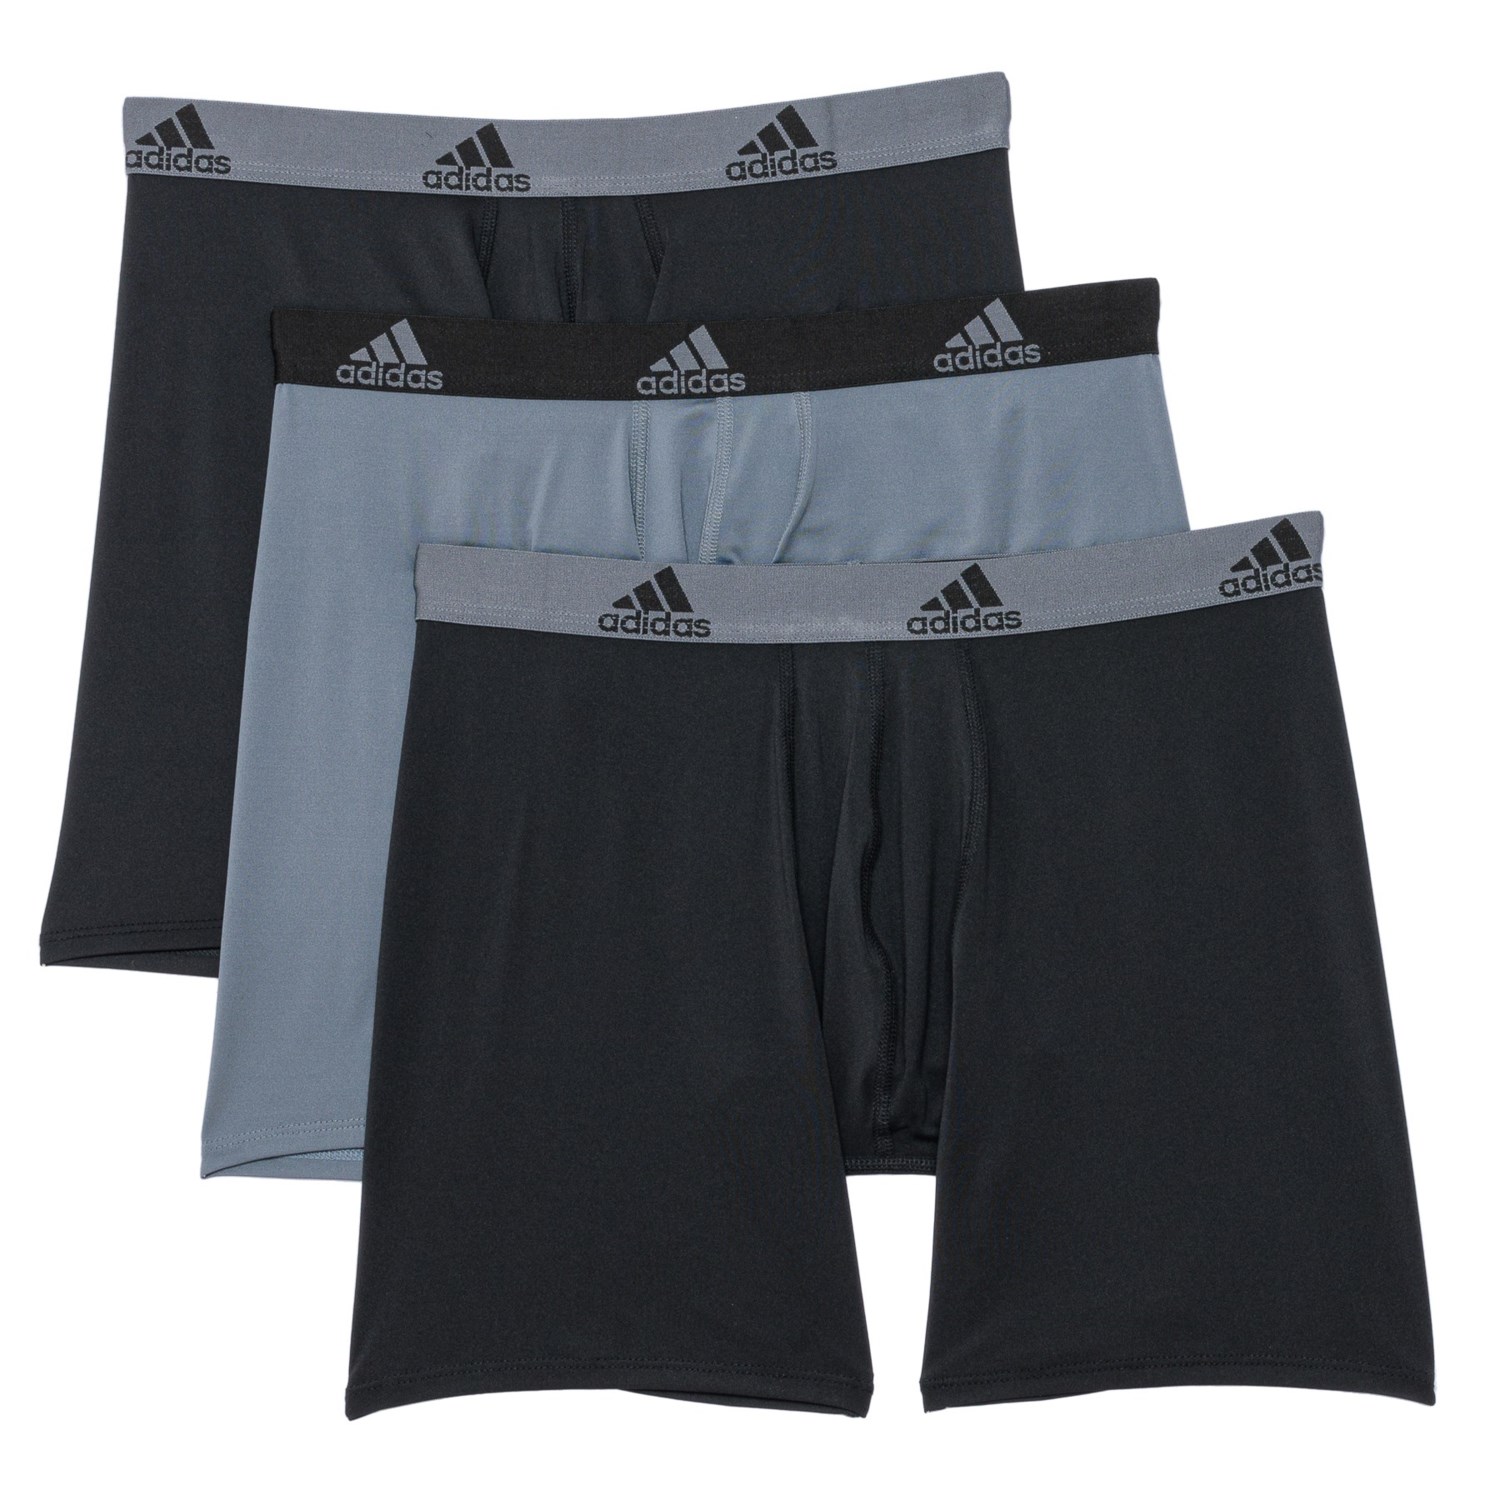 Core-Performance Boxer Save Briefs adidas 3-Pack - - 46%